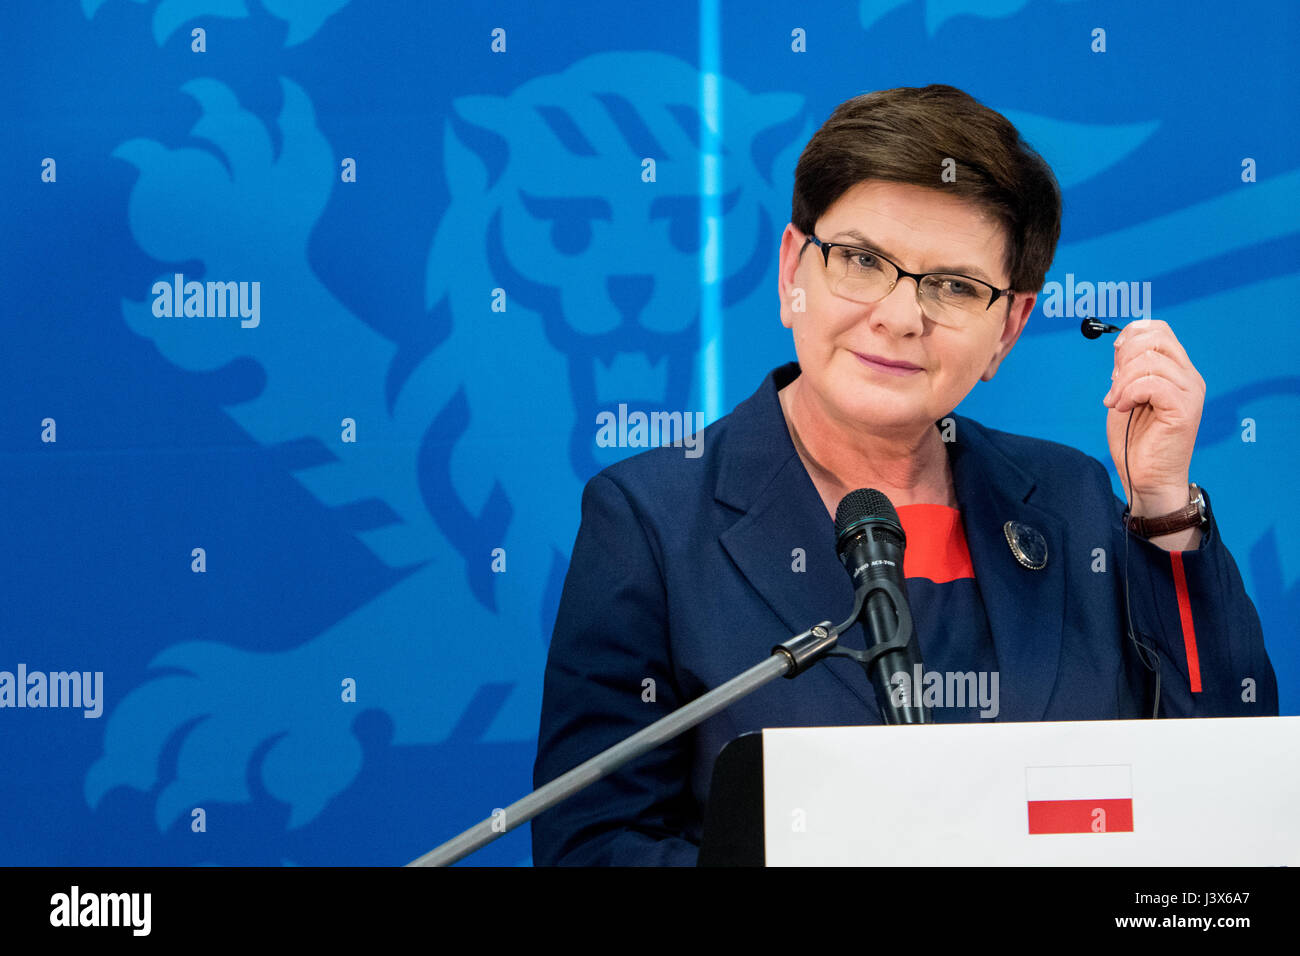 Tallinn, Estonia, 8th May 2017. Prime Minister of Poland Beata Szydlo adresses the media after she met Prime Minister of Estonia Juri Ratas, Prime Minister of Latvia Maris Kucinskis and Prime Minister of Lithuania Saulius Skvernelis  in Tallinn. The topics of the meeting were regional security, energy community, transport connections and the future of the European Union. Credit: Nicolas Bouvy/Alamy Live News Stock Photo